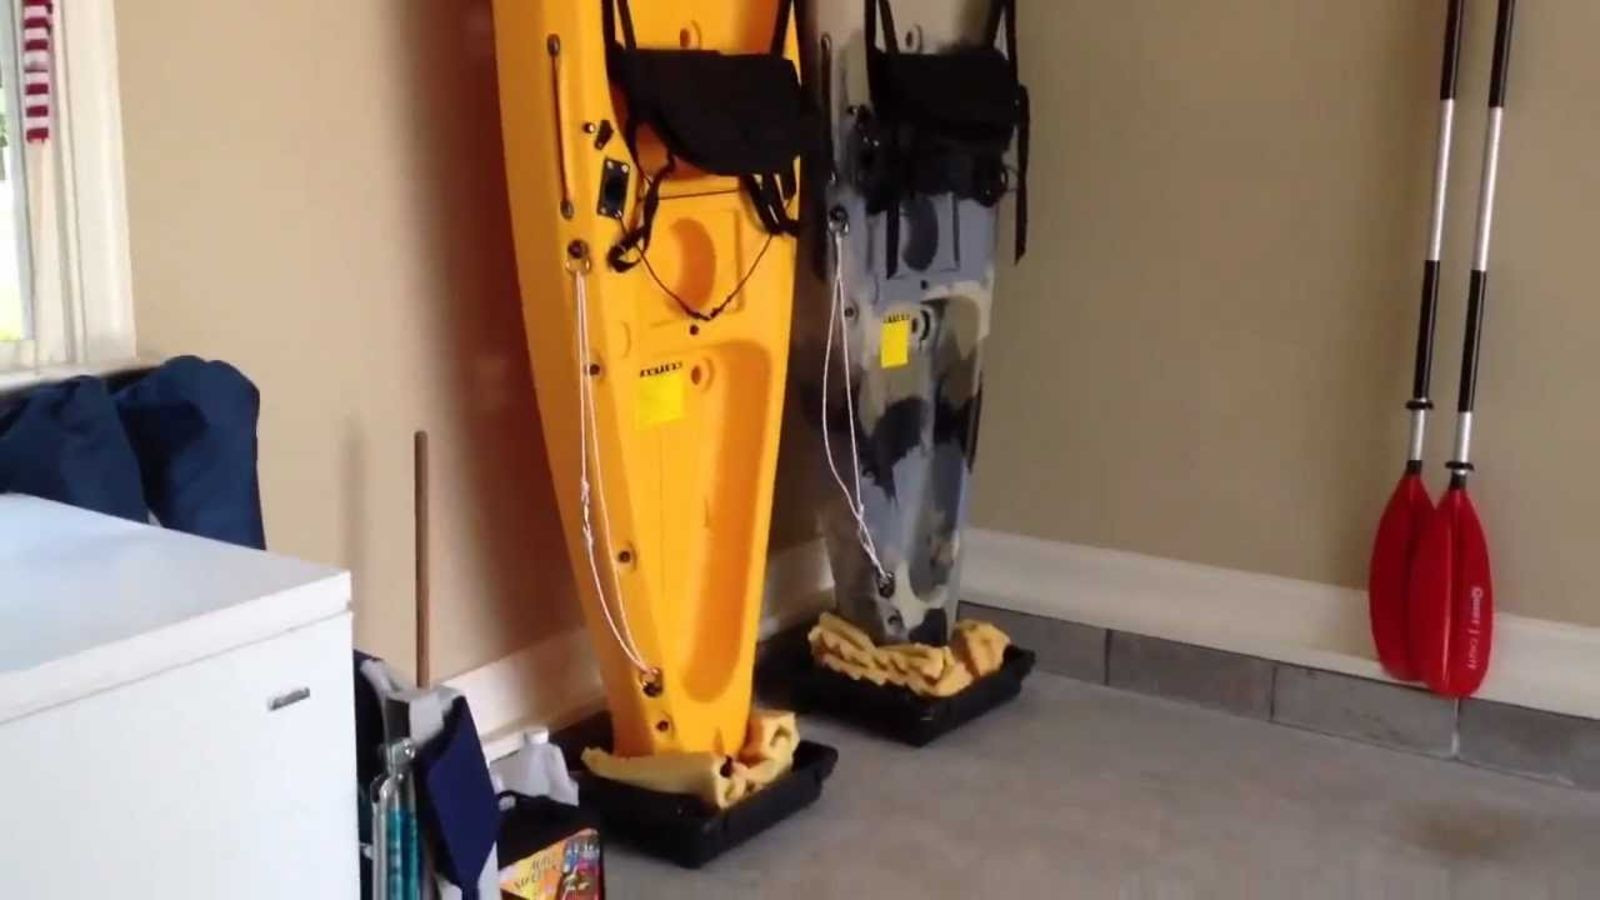 DIY Kayak Wall Rack
 Keep Your Kayak or Surfboard Secure with this DIY Stand